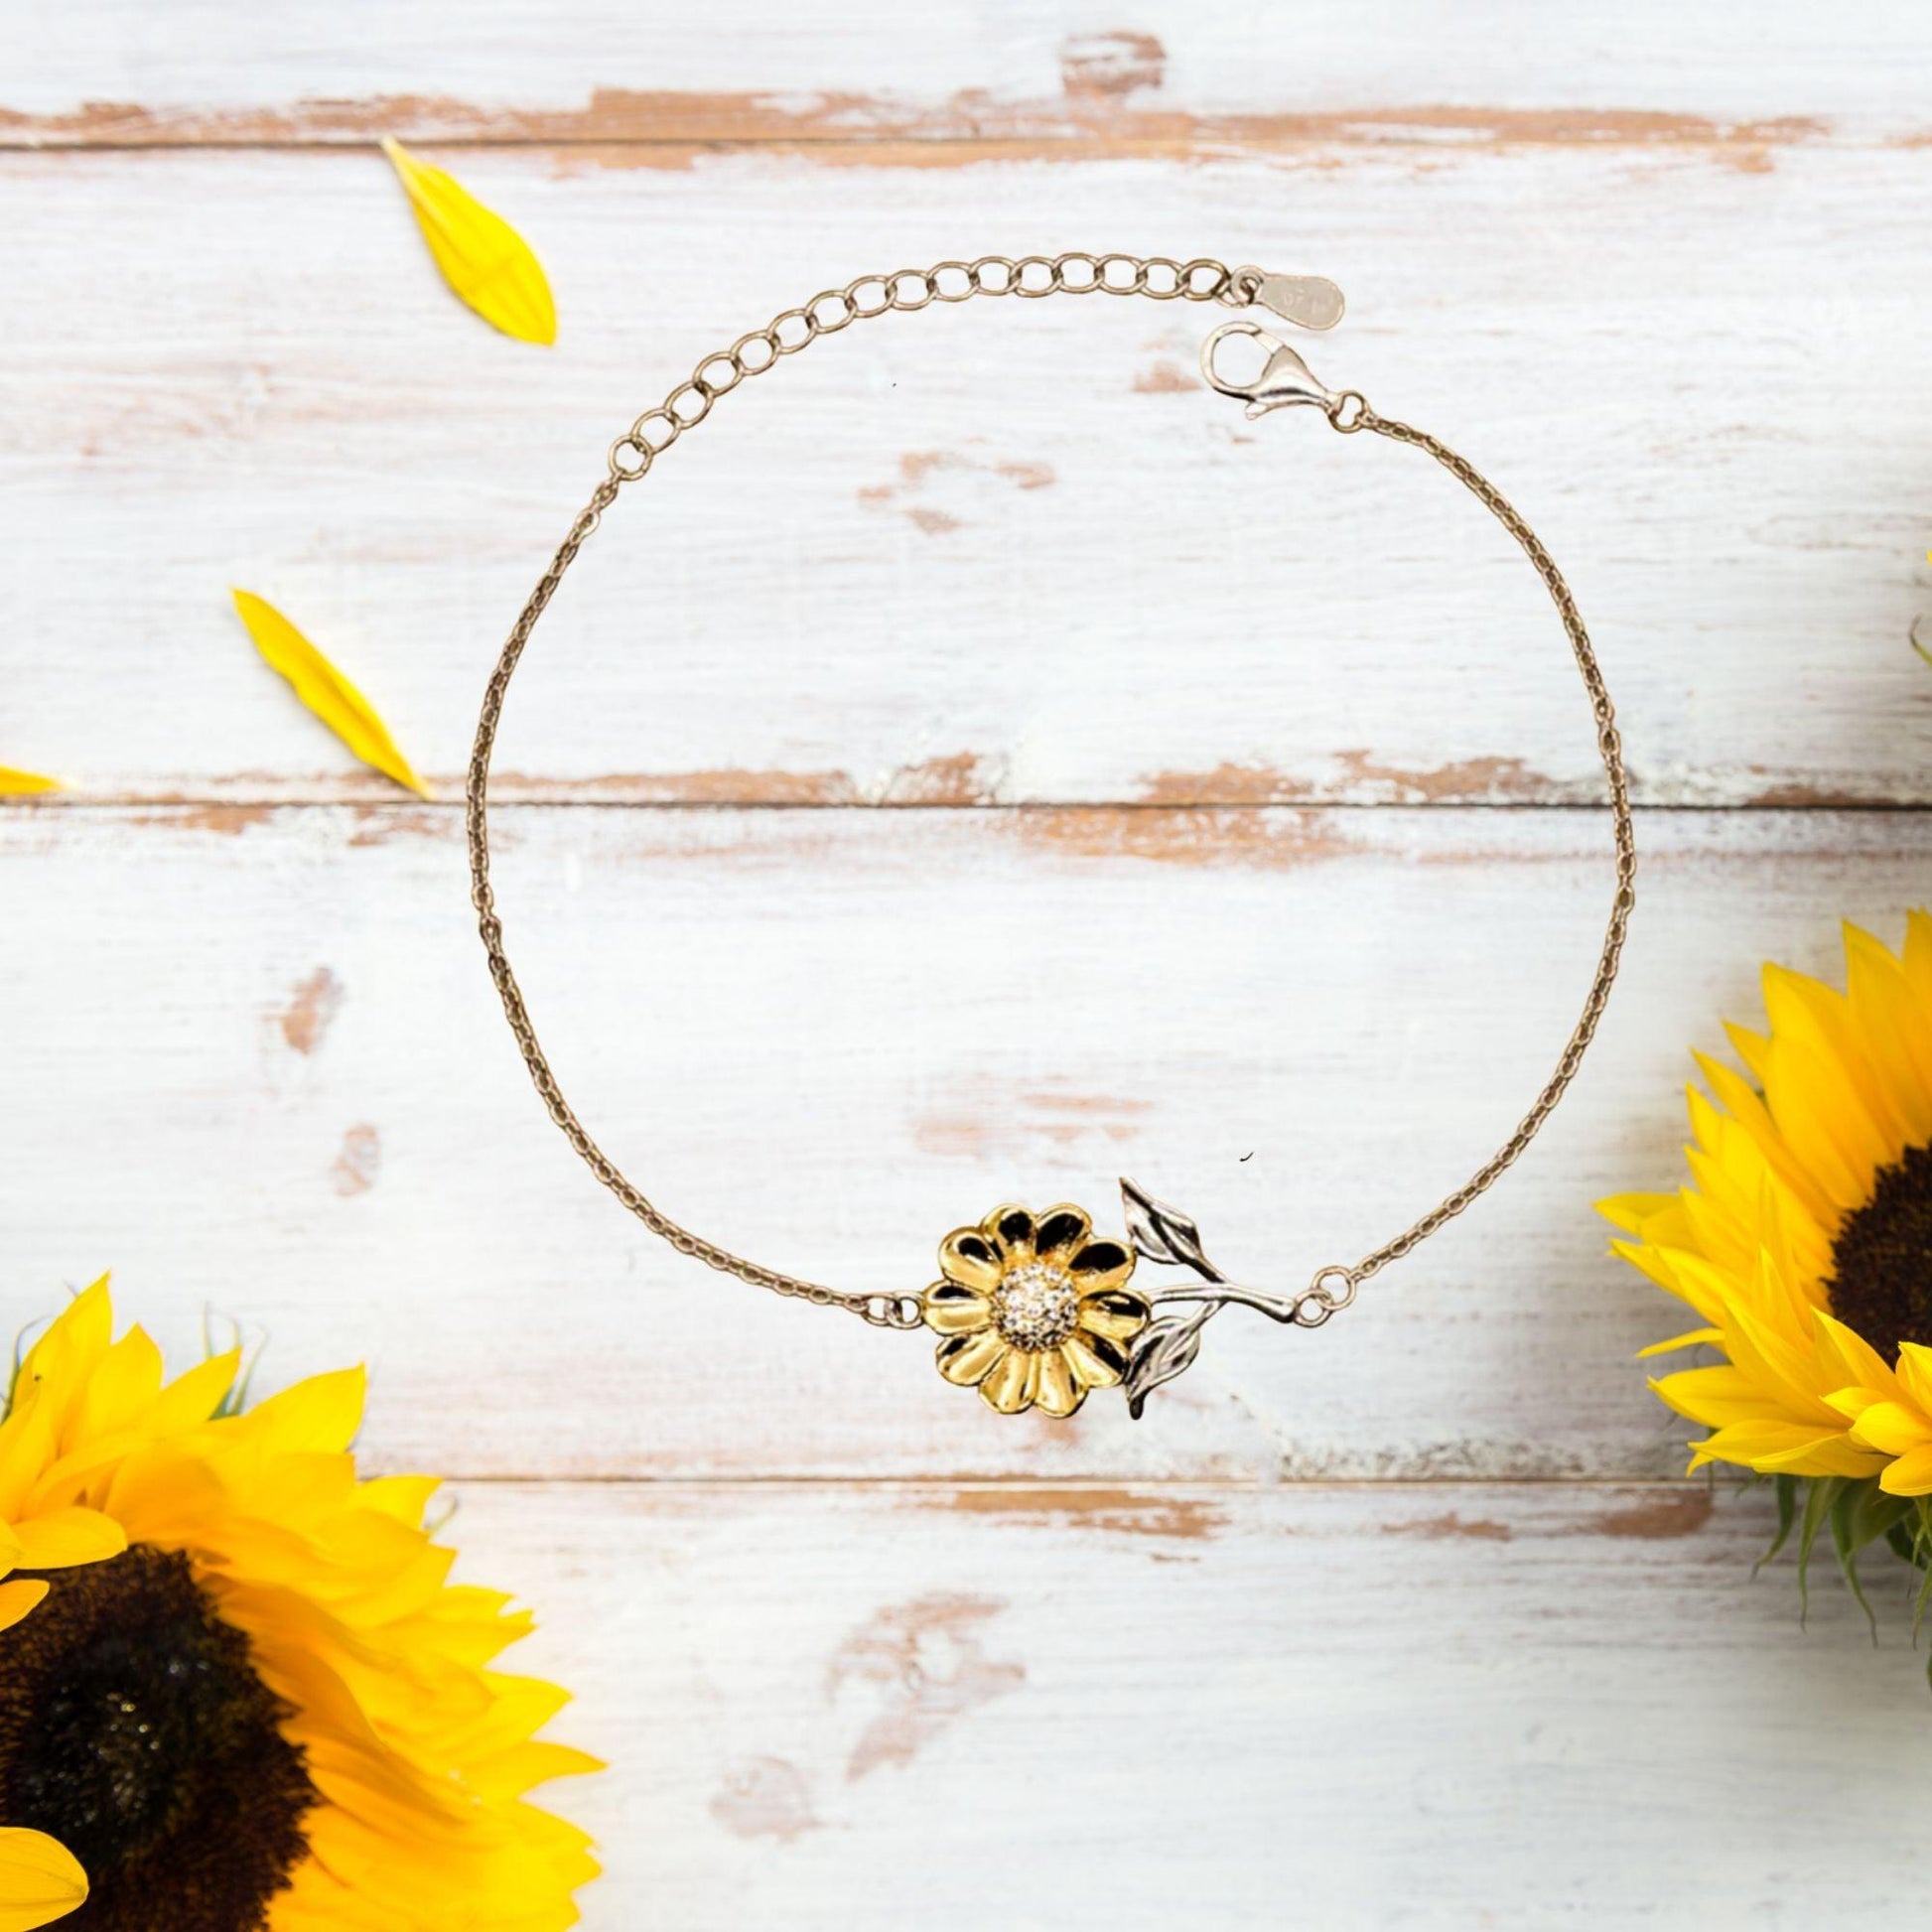 Preacher Sunflower Bracelet - Thanks for being who you are - Birthday Christmas Jewelry Gifts Coworkers Colleague Boss - Mallard Moon Gift Shop